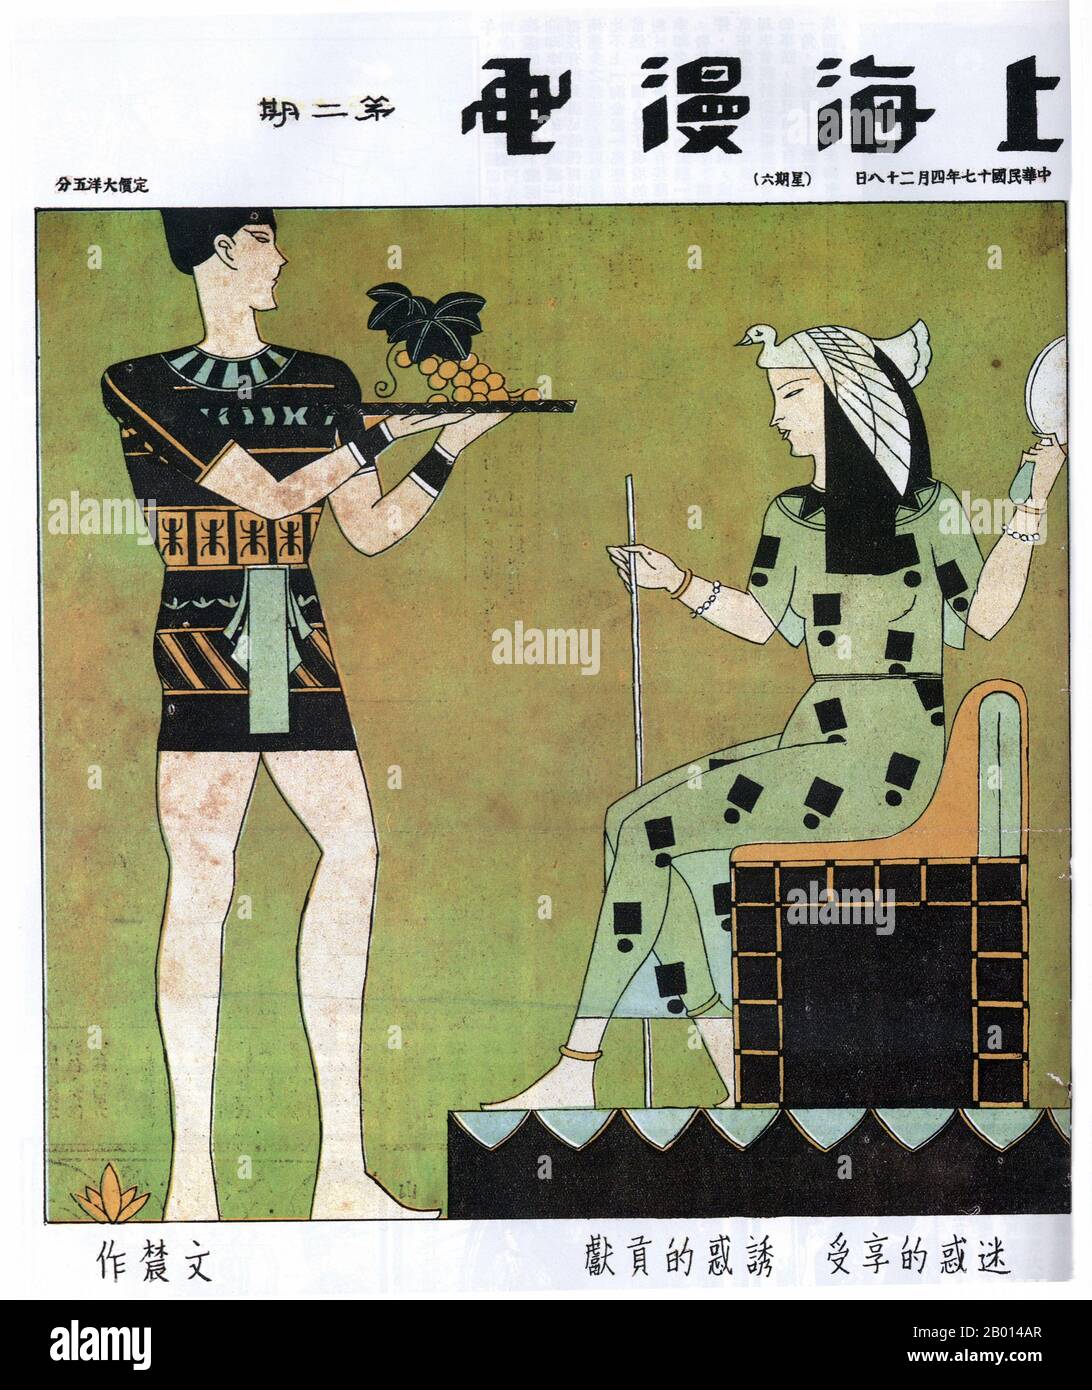 China: An image from 'Shanghai Manhua' borrowing from the art of ancient Egypt. A young man offers a tray of grapes to a stylised queen. The caption translates; 'Offer Temptation, Receive Infatuation'. By Huan Wennong, April 28, 1928.  The pictorial 'Shanghai Manhua' (Shanghai Sketch), published between April 21, 1928 and June 7, 1930, was a mixture of drawings, photographs and images ranging from advertisements to social criticism and political caricatures.  Shanghai Manhua was an outlet for professional cartoonists and sketch masters, generally of an avant garde or progressive nature. Stock Photo